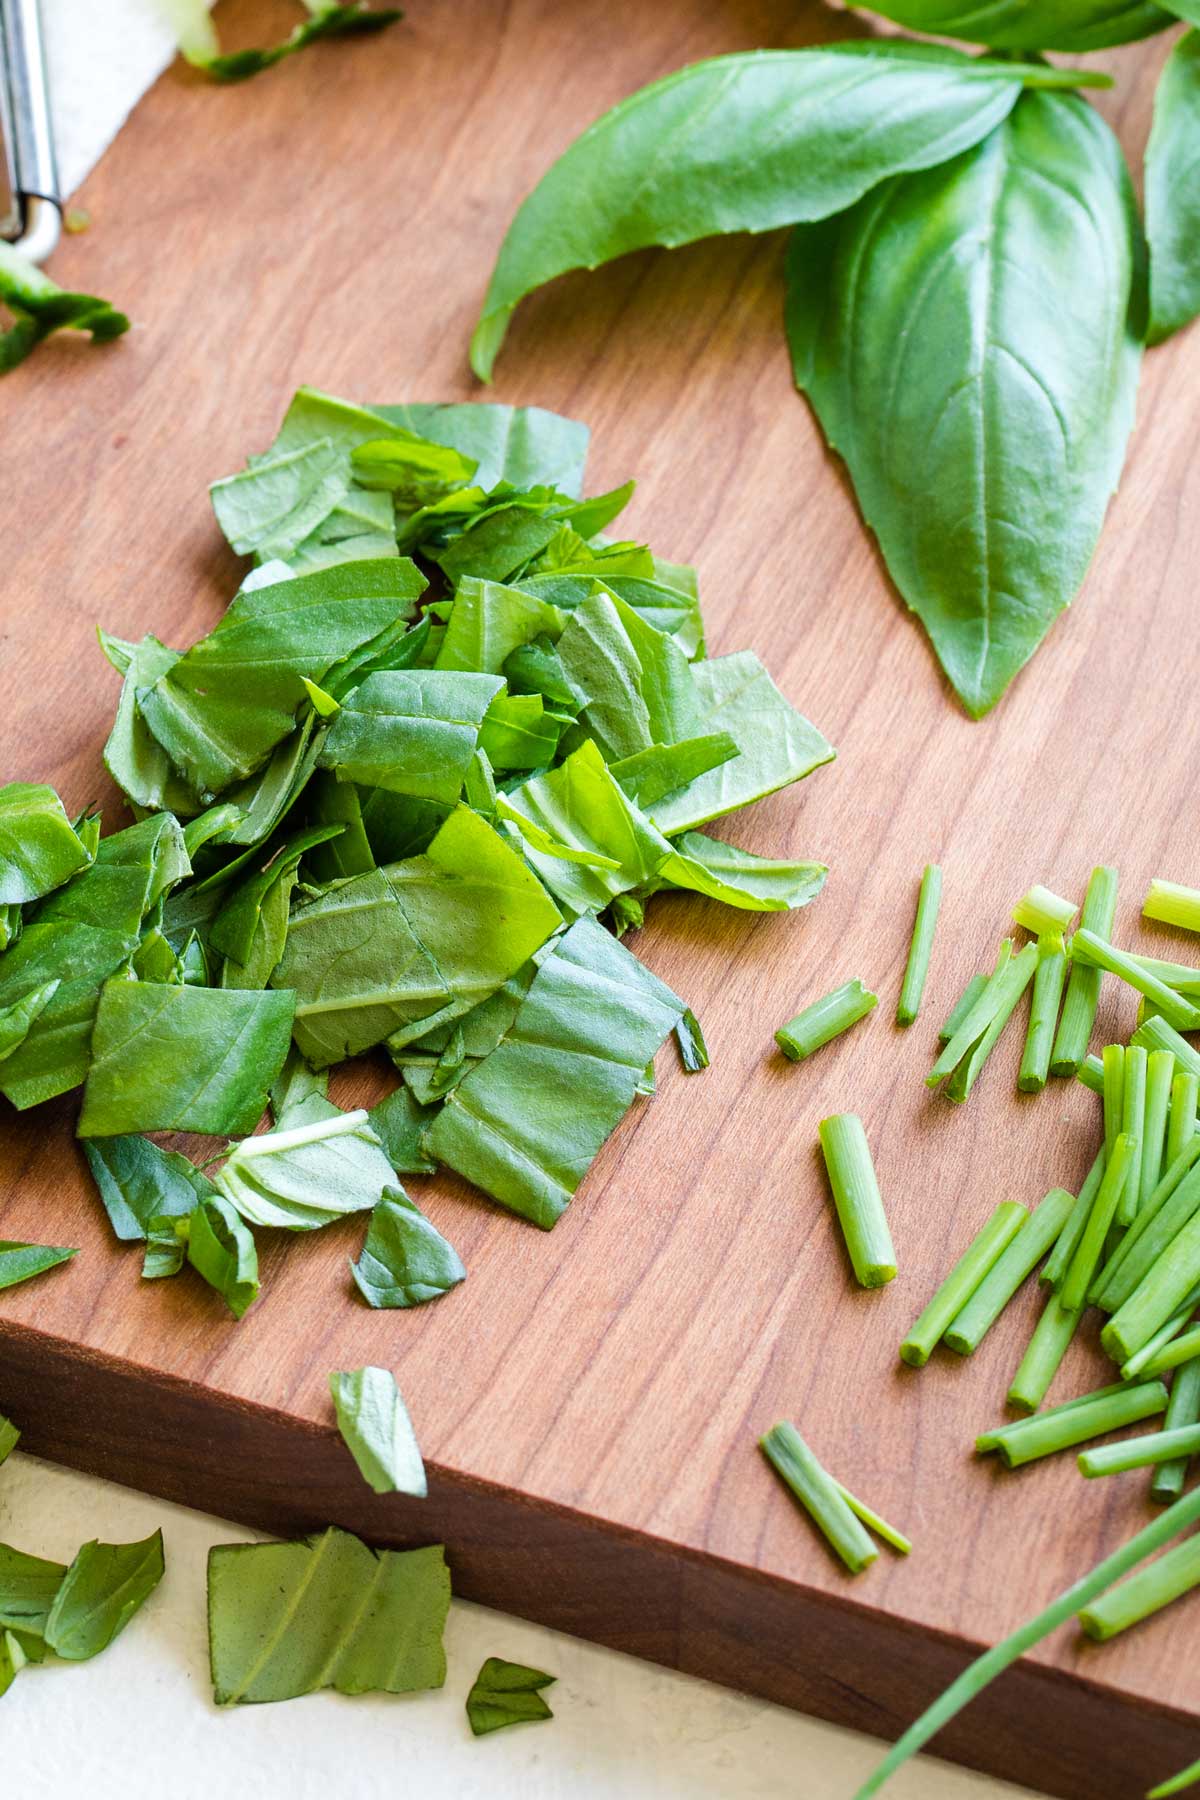 Whole basil leaves, a pile of chopped basil, and a little pile of sliced chives on a cutting board.